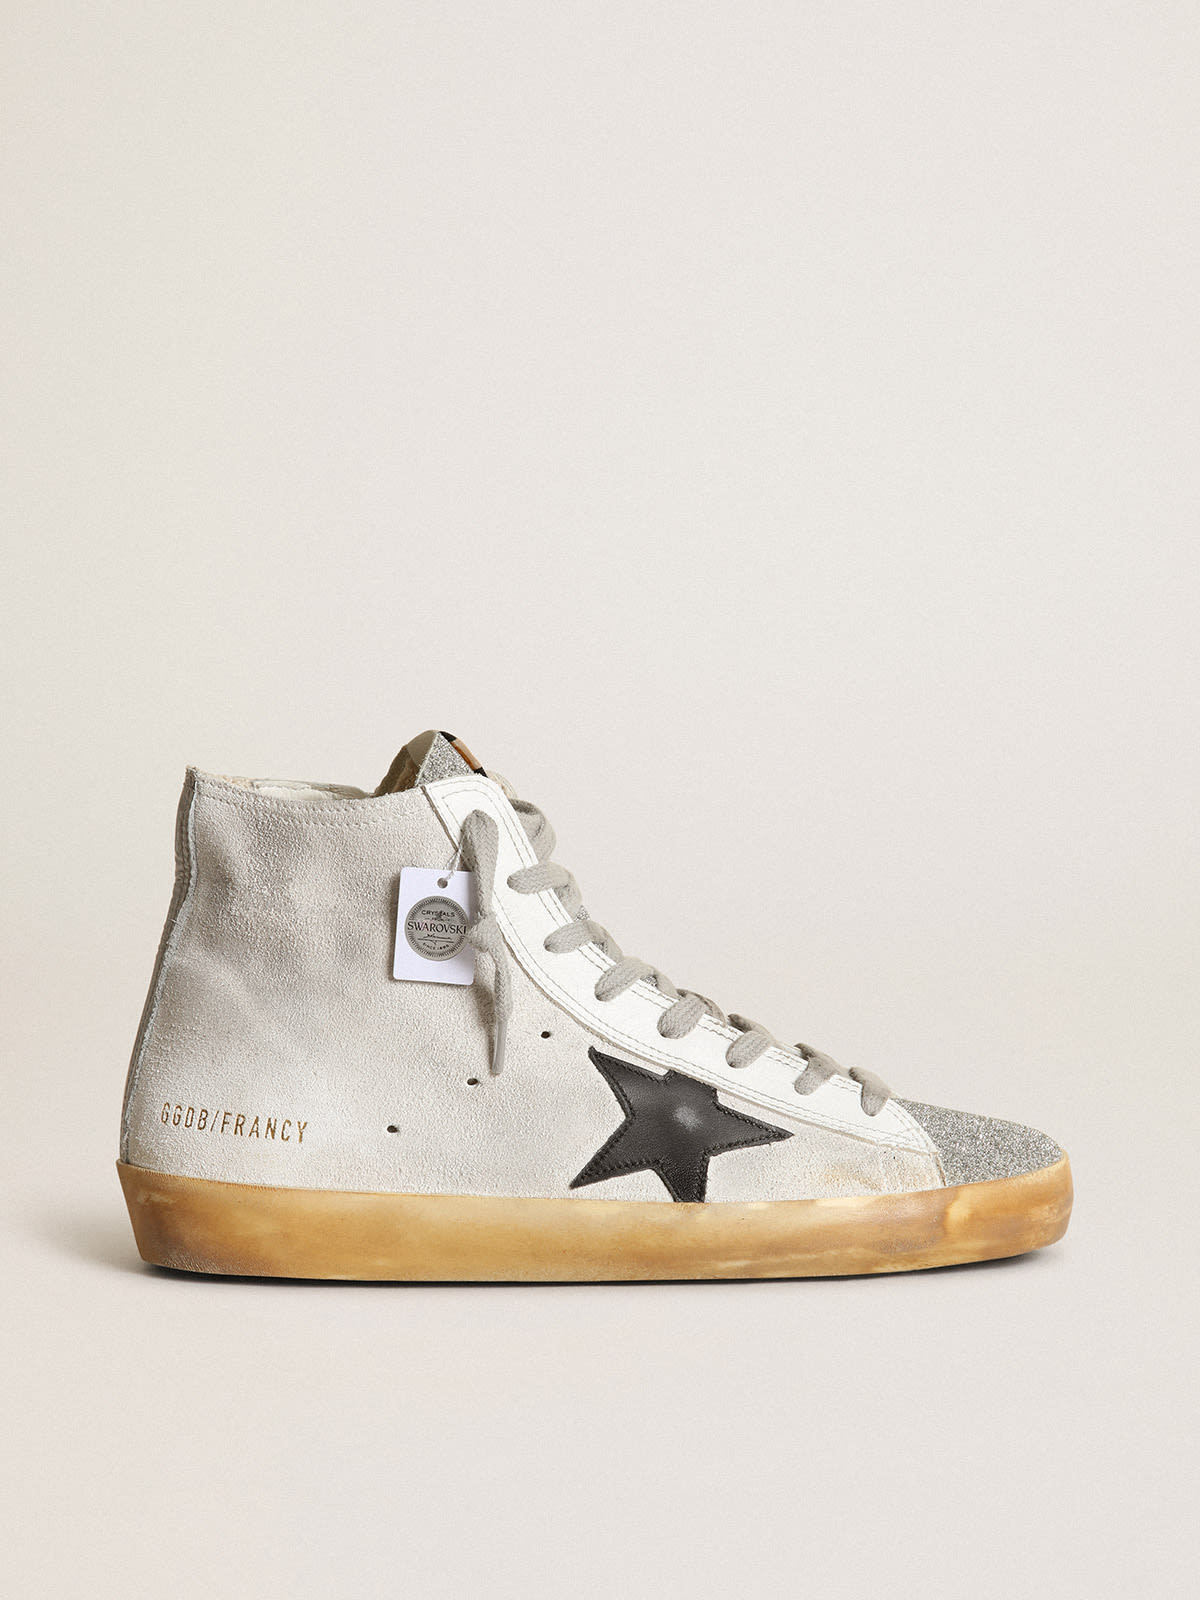 Golden Goose - Women's Francy in white suede with black leather star in 